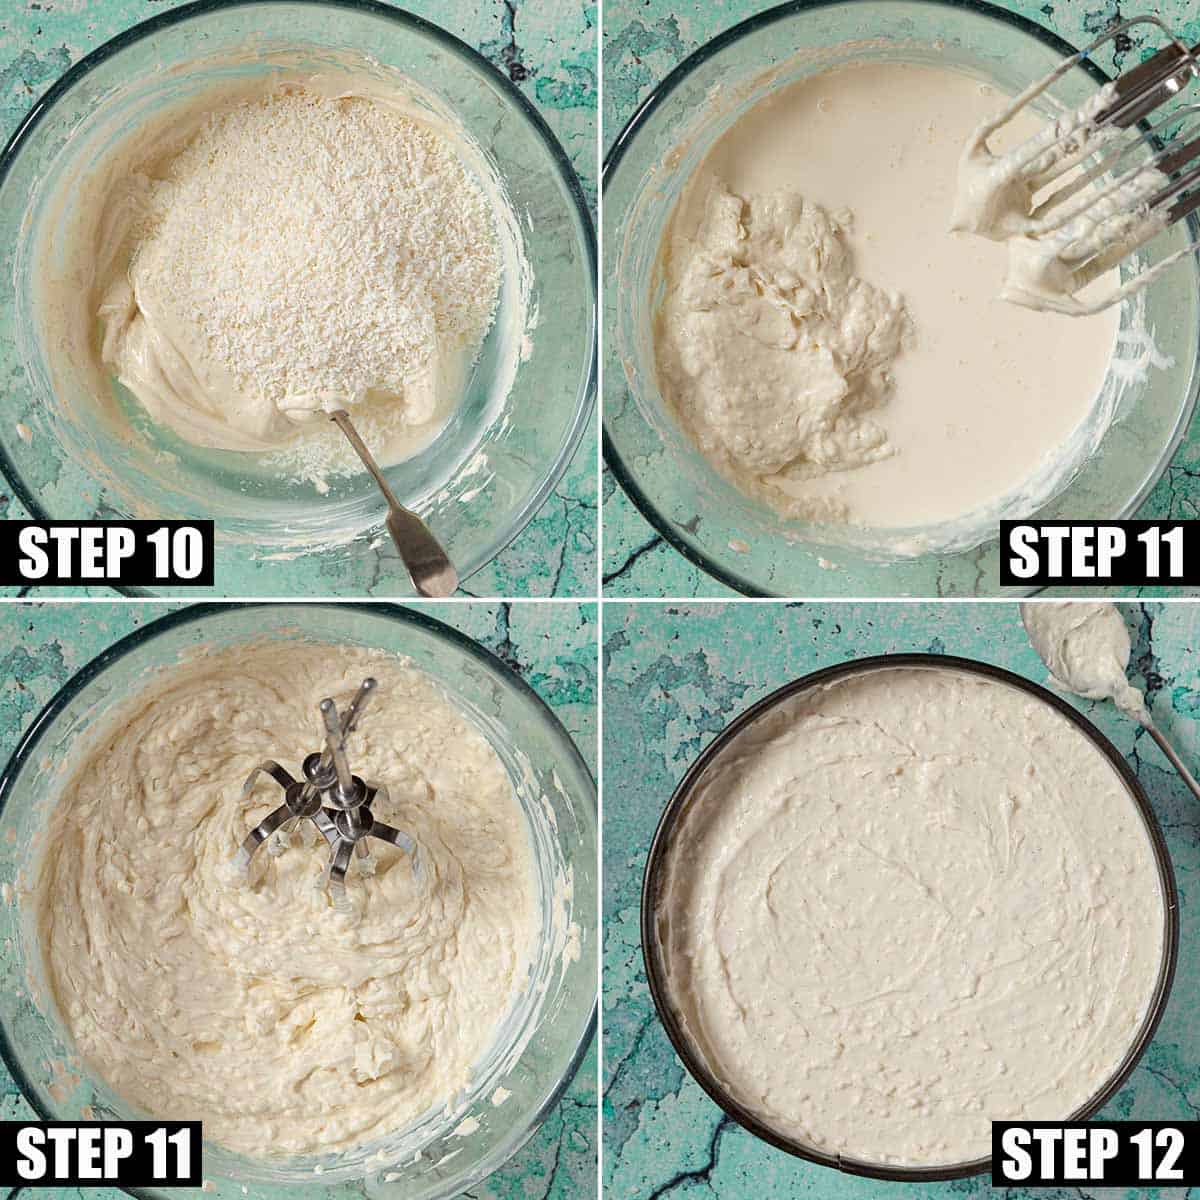 Collage of images showing a coconut dessert being prpared.